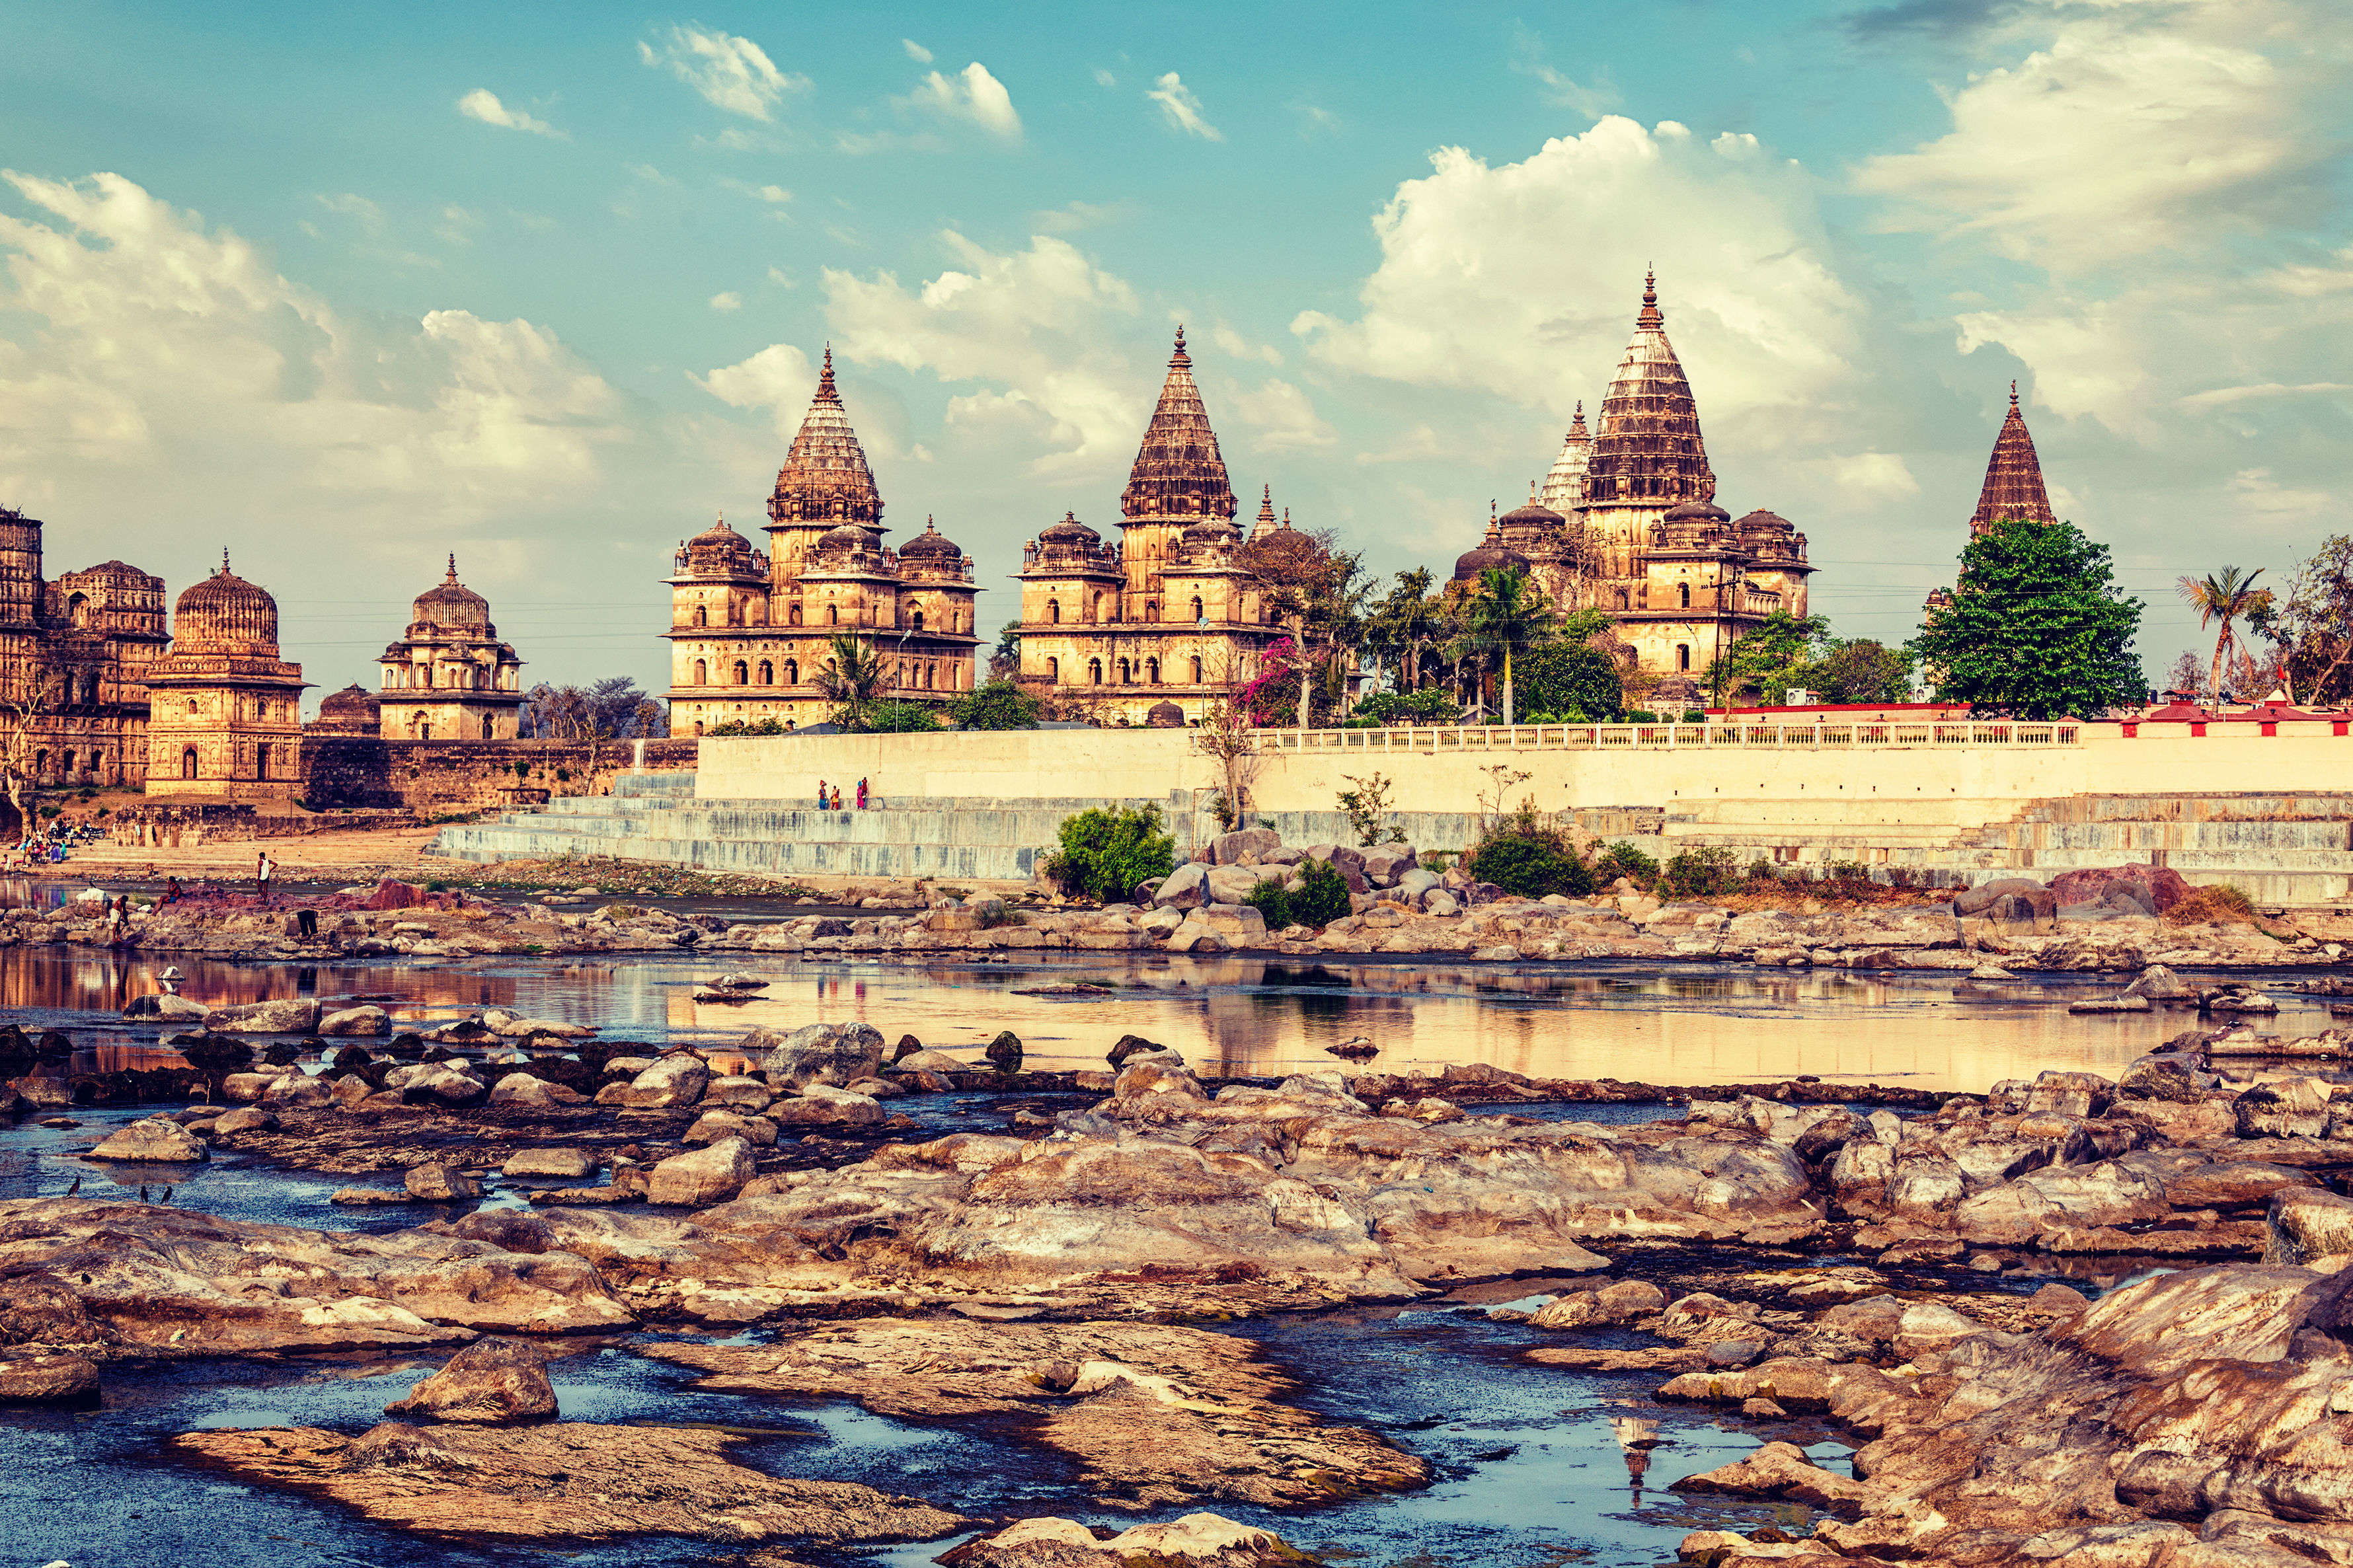 The historical town of Orchha included in the tentative list of UNESCO's heritage sites